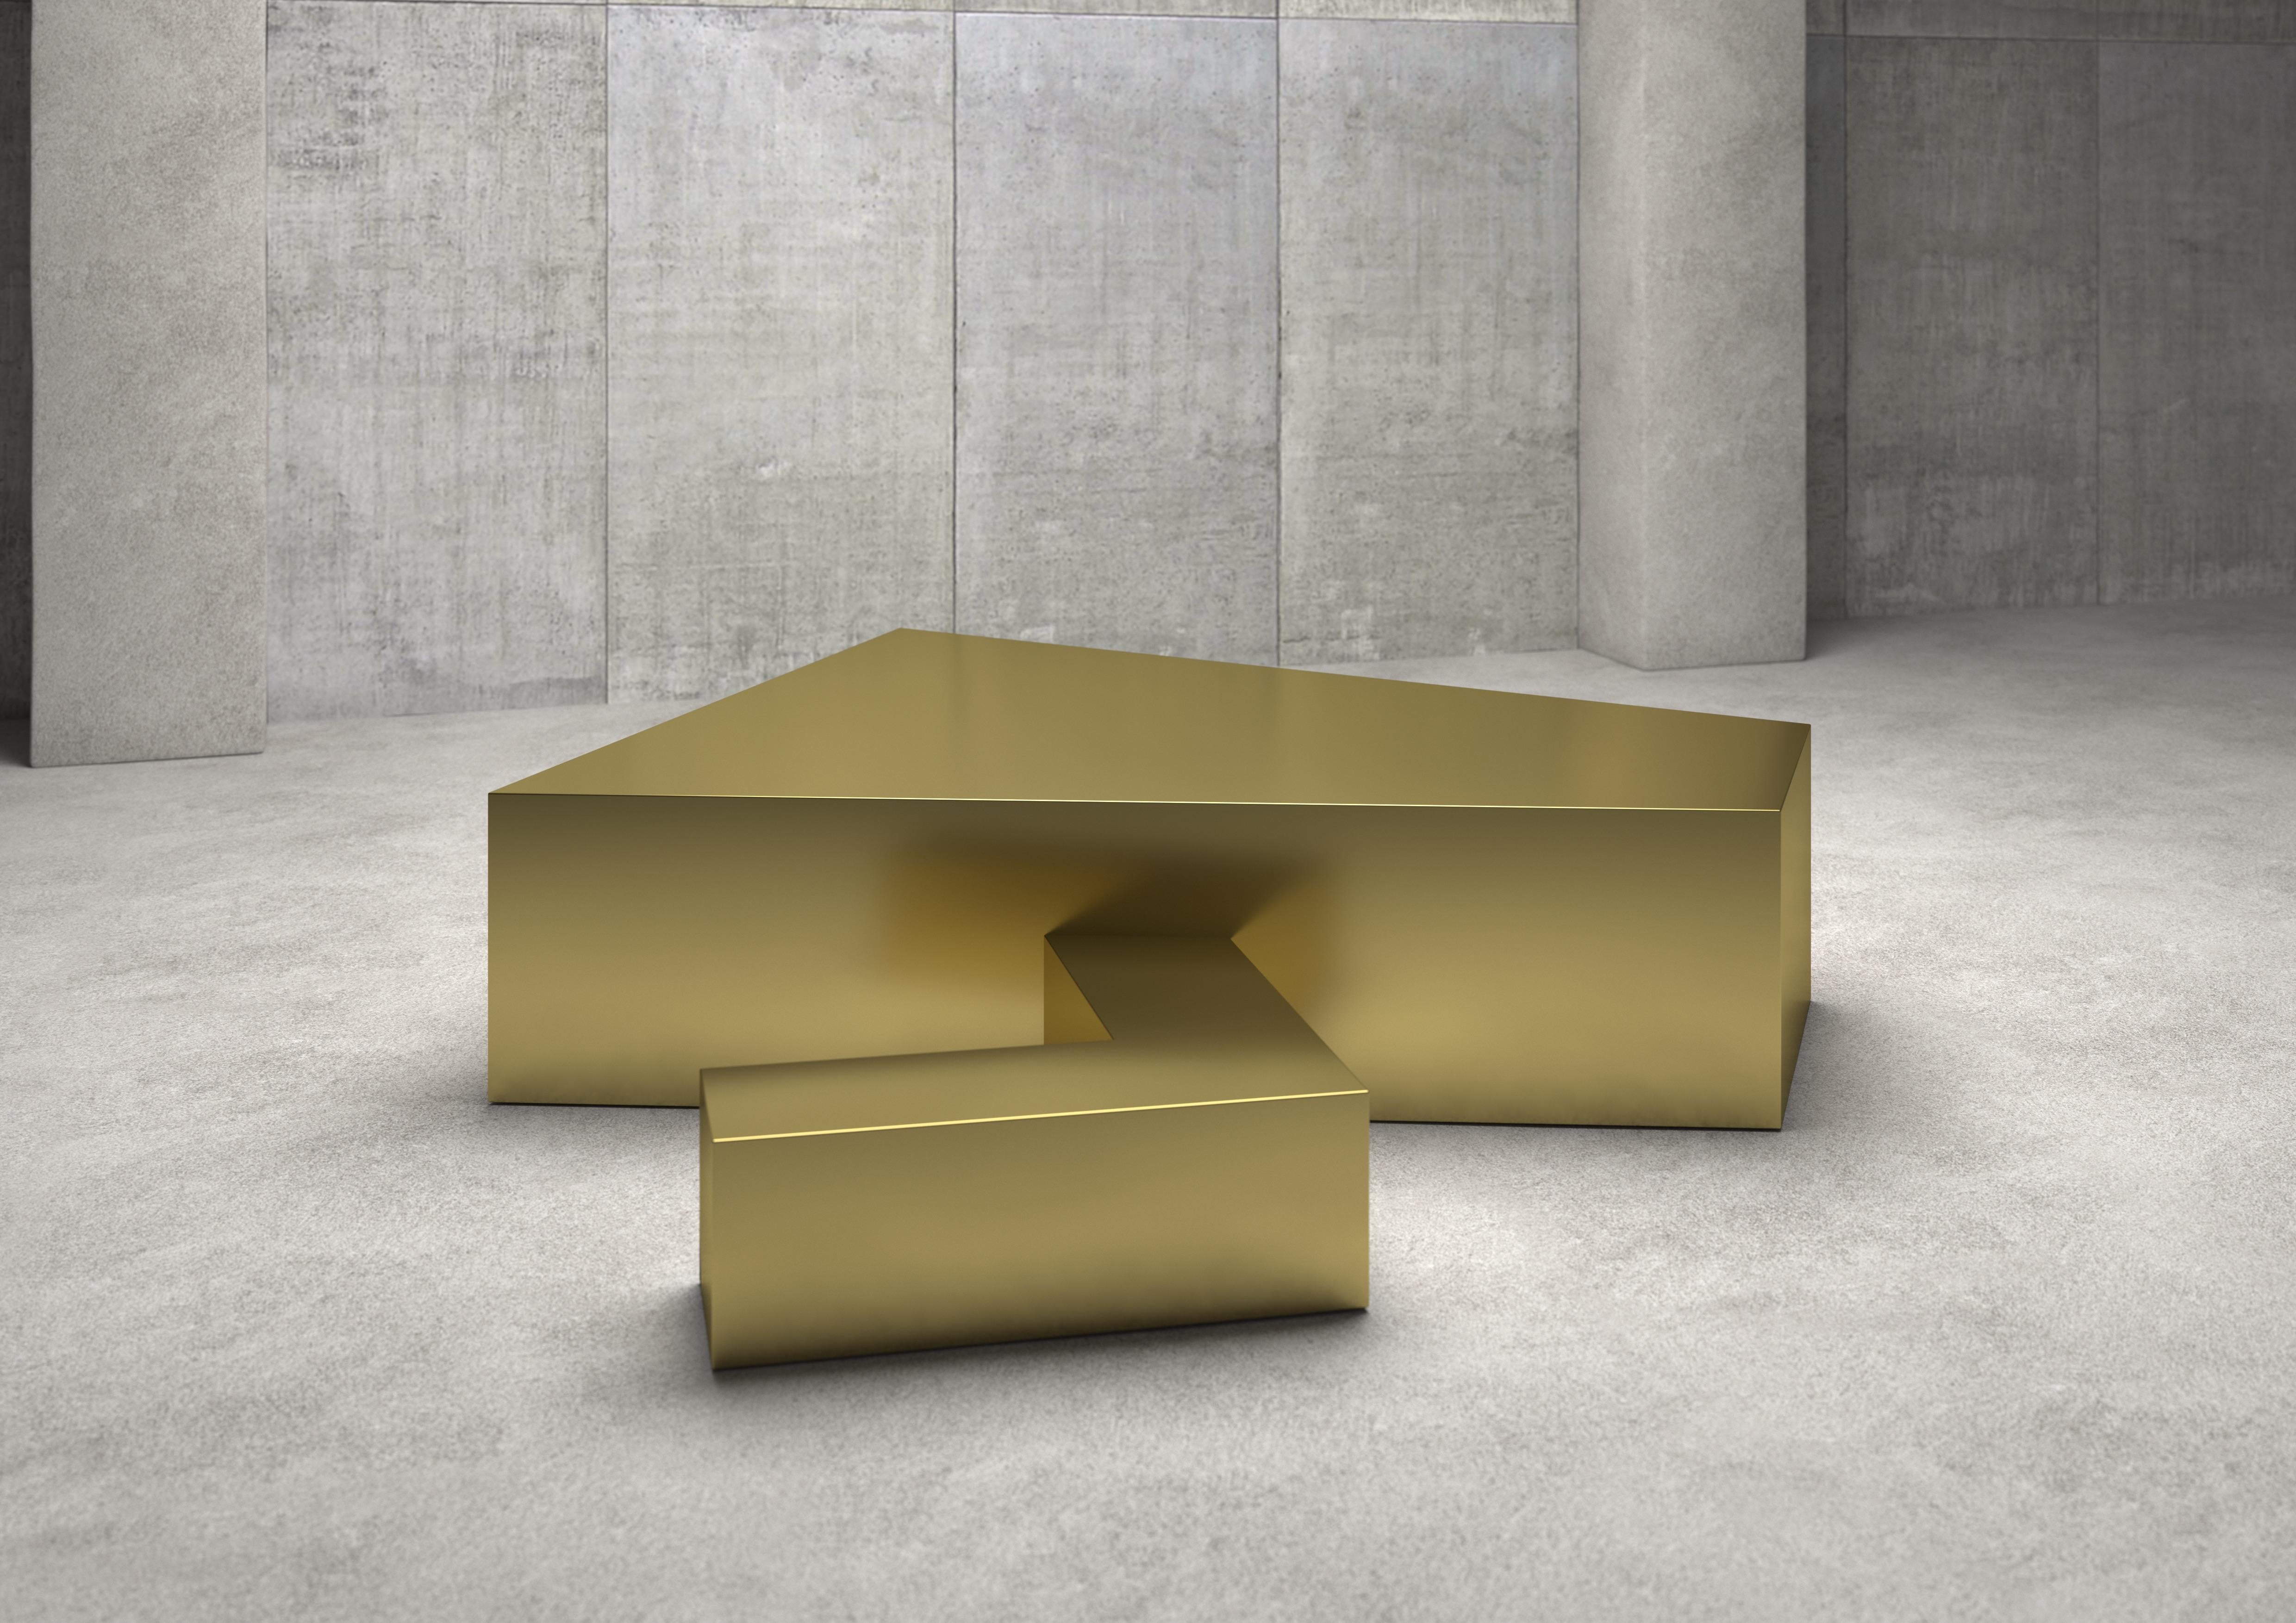 Virus A sculpture coffee table totally in satin brass from the Nature collection designed by Sergio Ragalzi. Limited edition of three pieces. Produced for Superego Editions.
Numbered and signed.

Biography
Sergio Ragalzi was born in Turin in